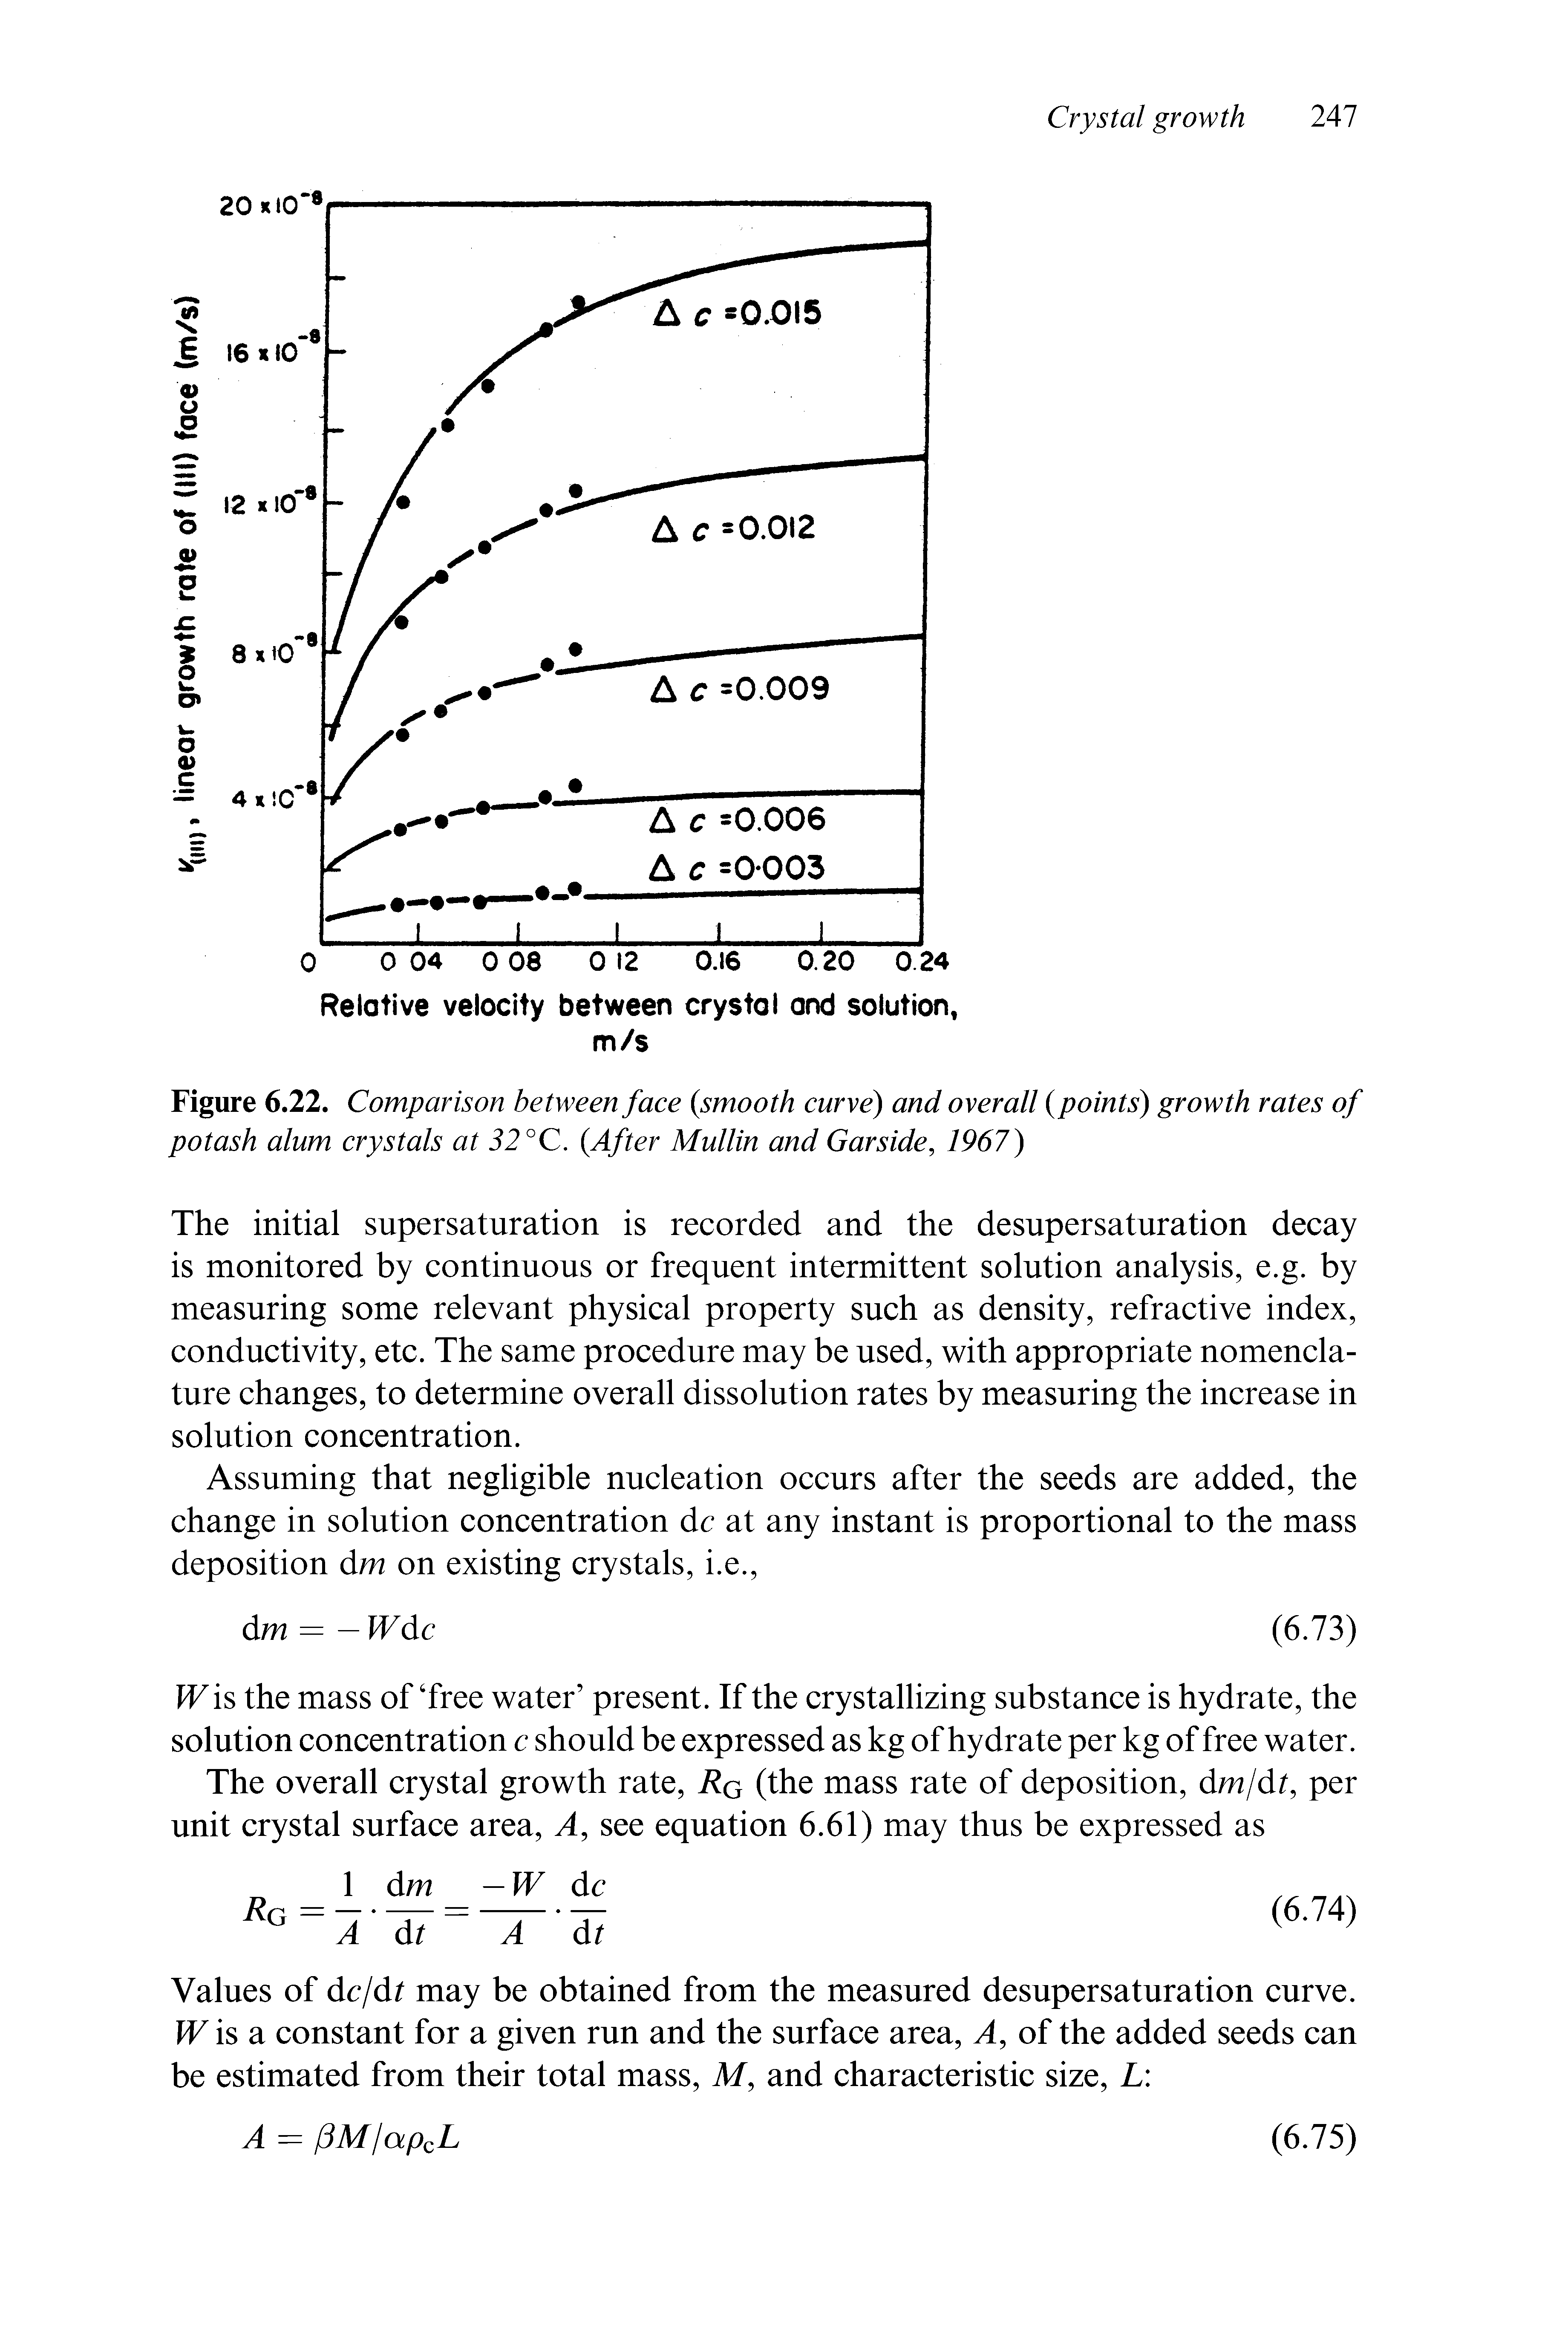 Figure 6.22. Comparison between face smooth curve) and overall points) growth rates of potash alum crystals at 32 °C. After Mullin and Garside, 1967)...